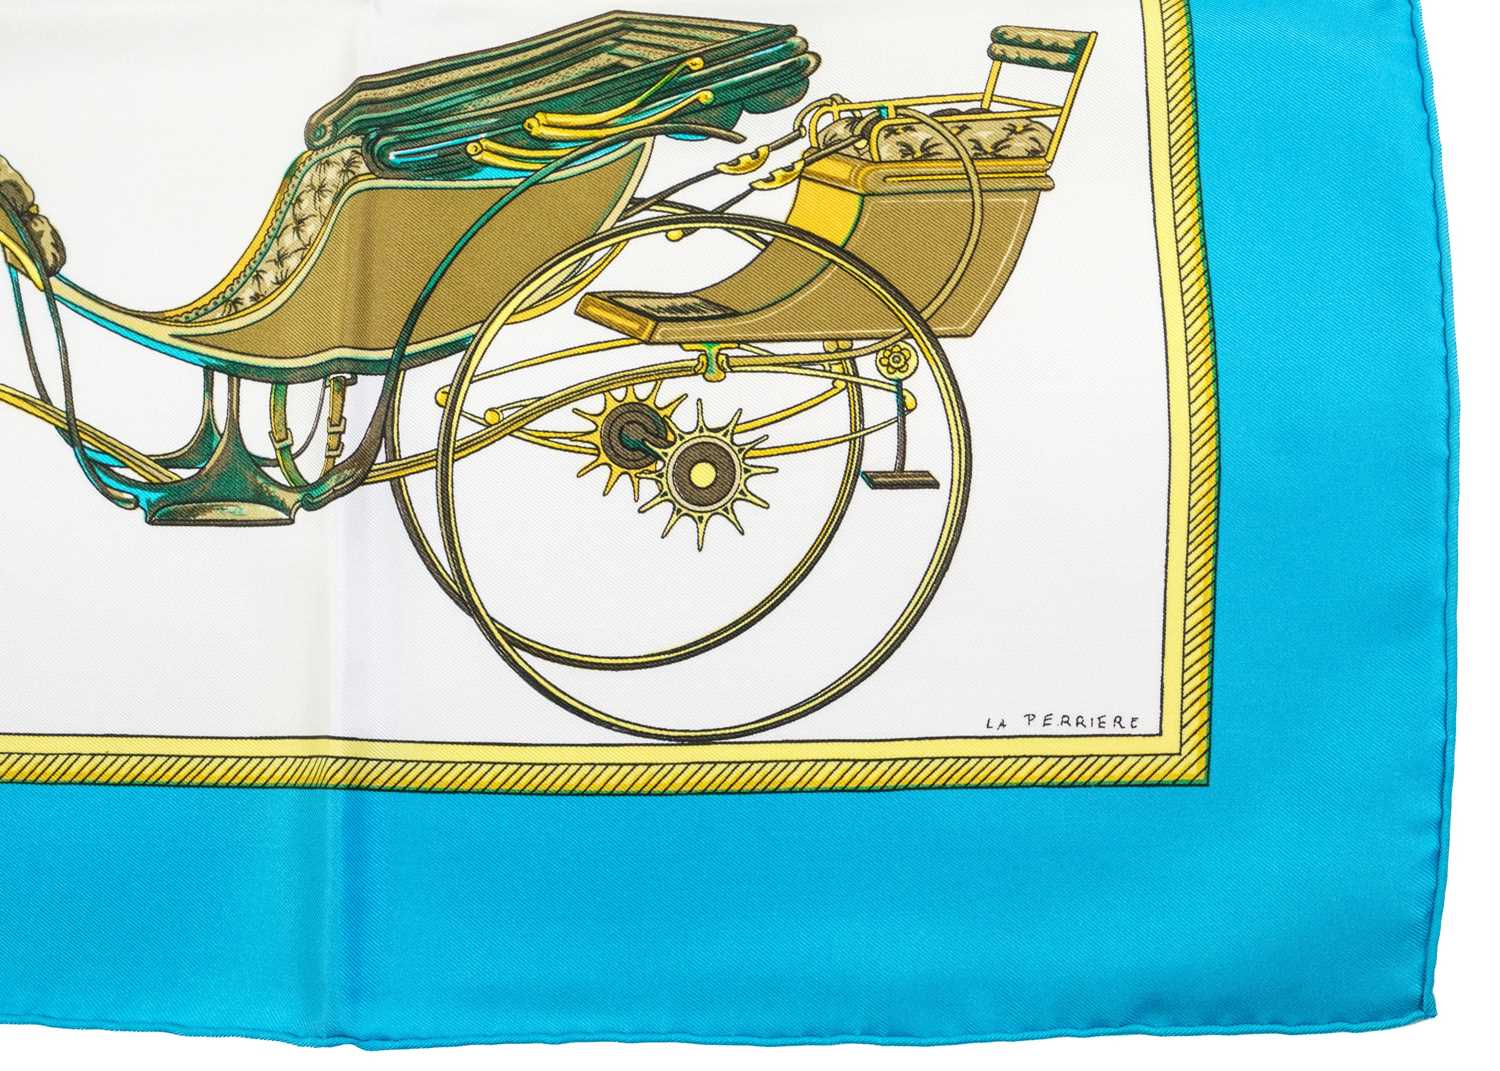 HERMES - A silk scarf in 'Les voitures a transformation' pattern designed by La Perriere. - Image 6 of 6